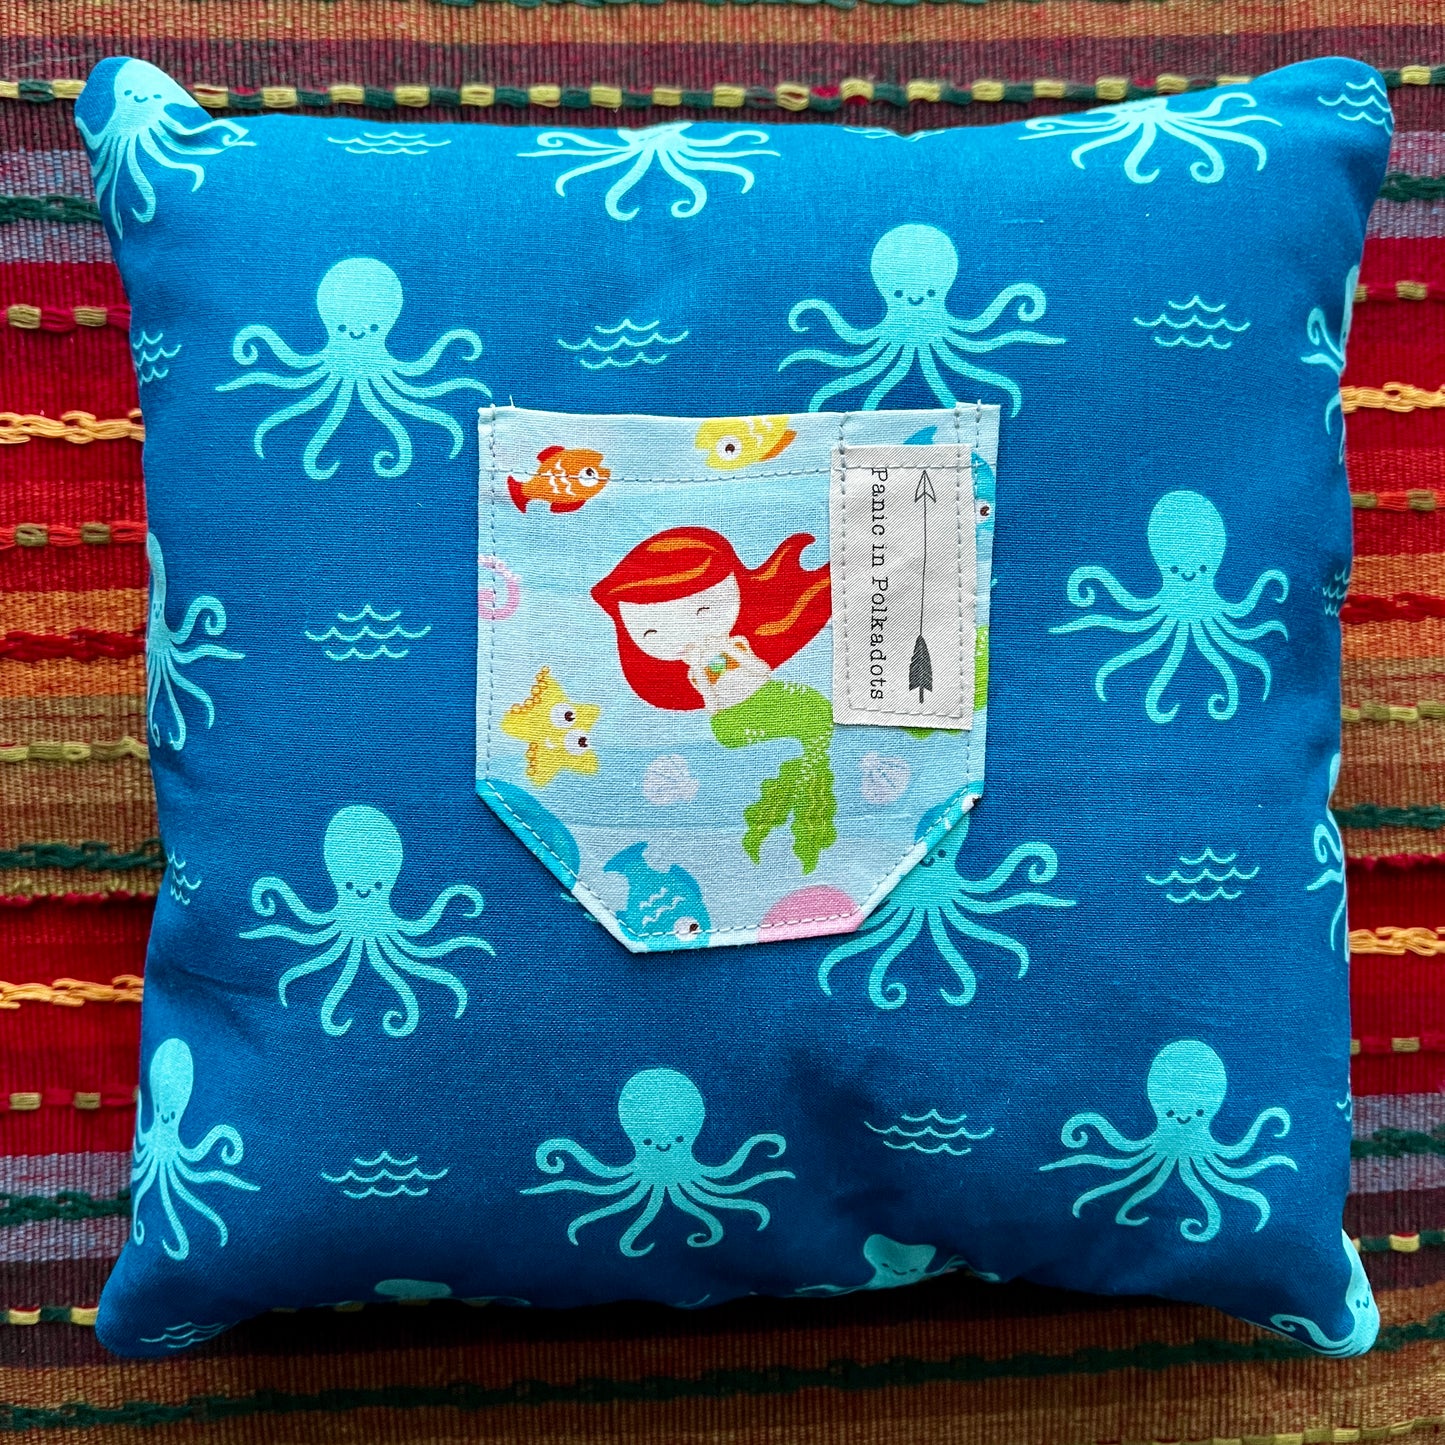 back view of flounder cathedral square pillow, with octopus print and mermaid pocket